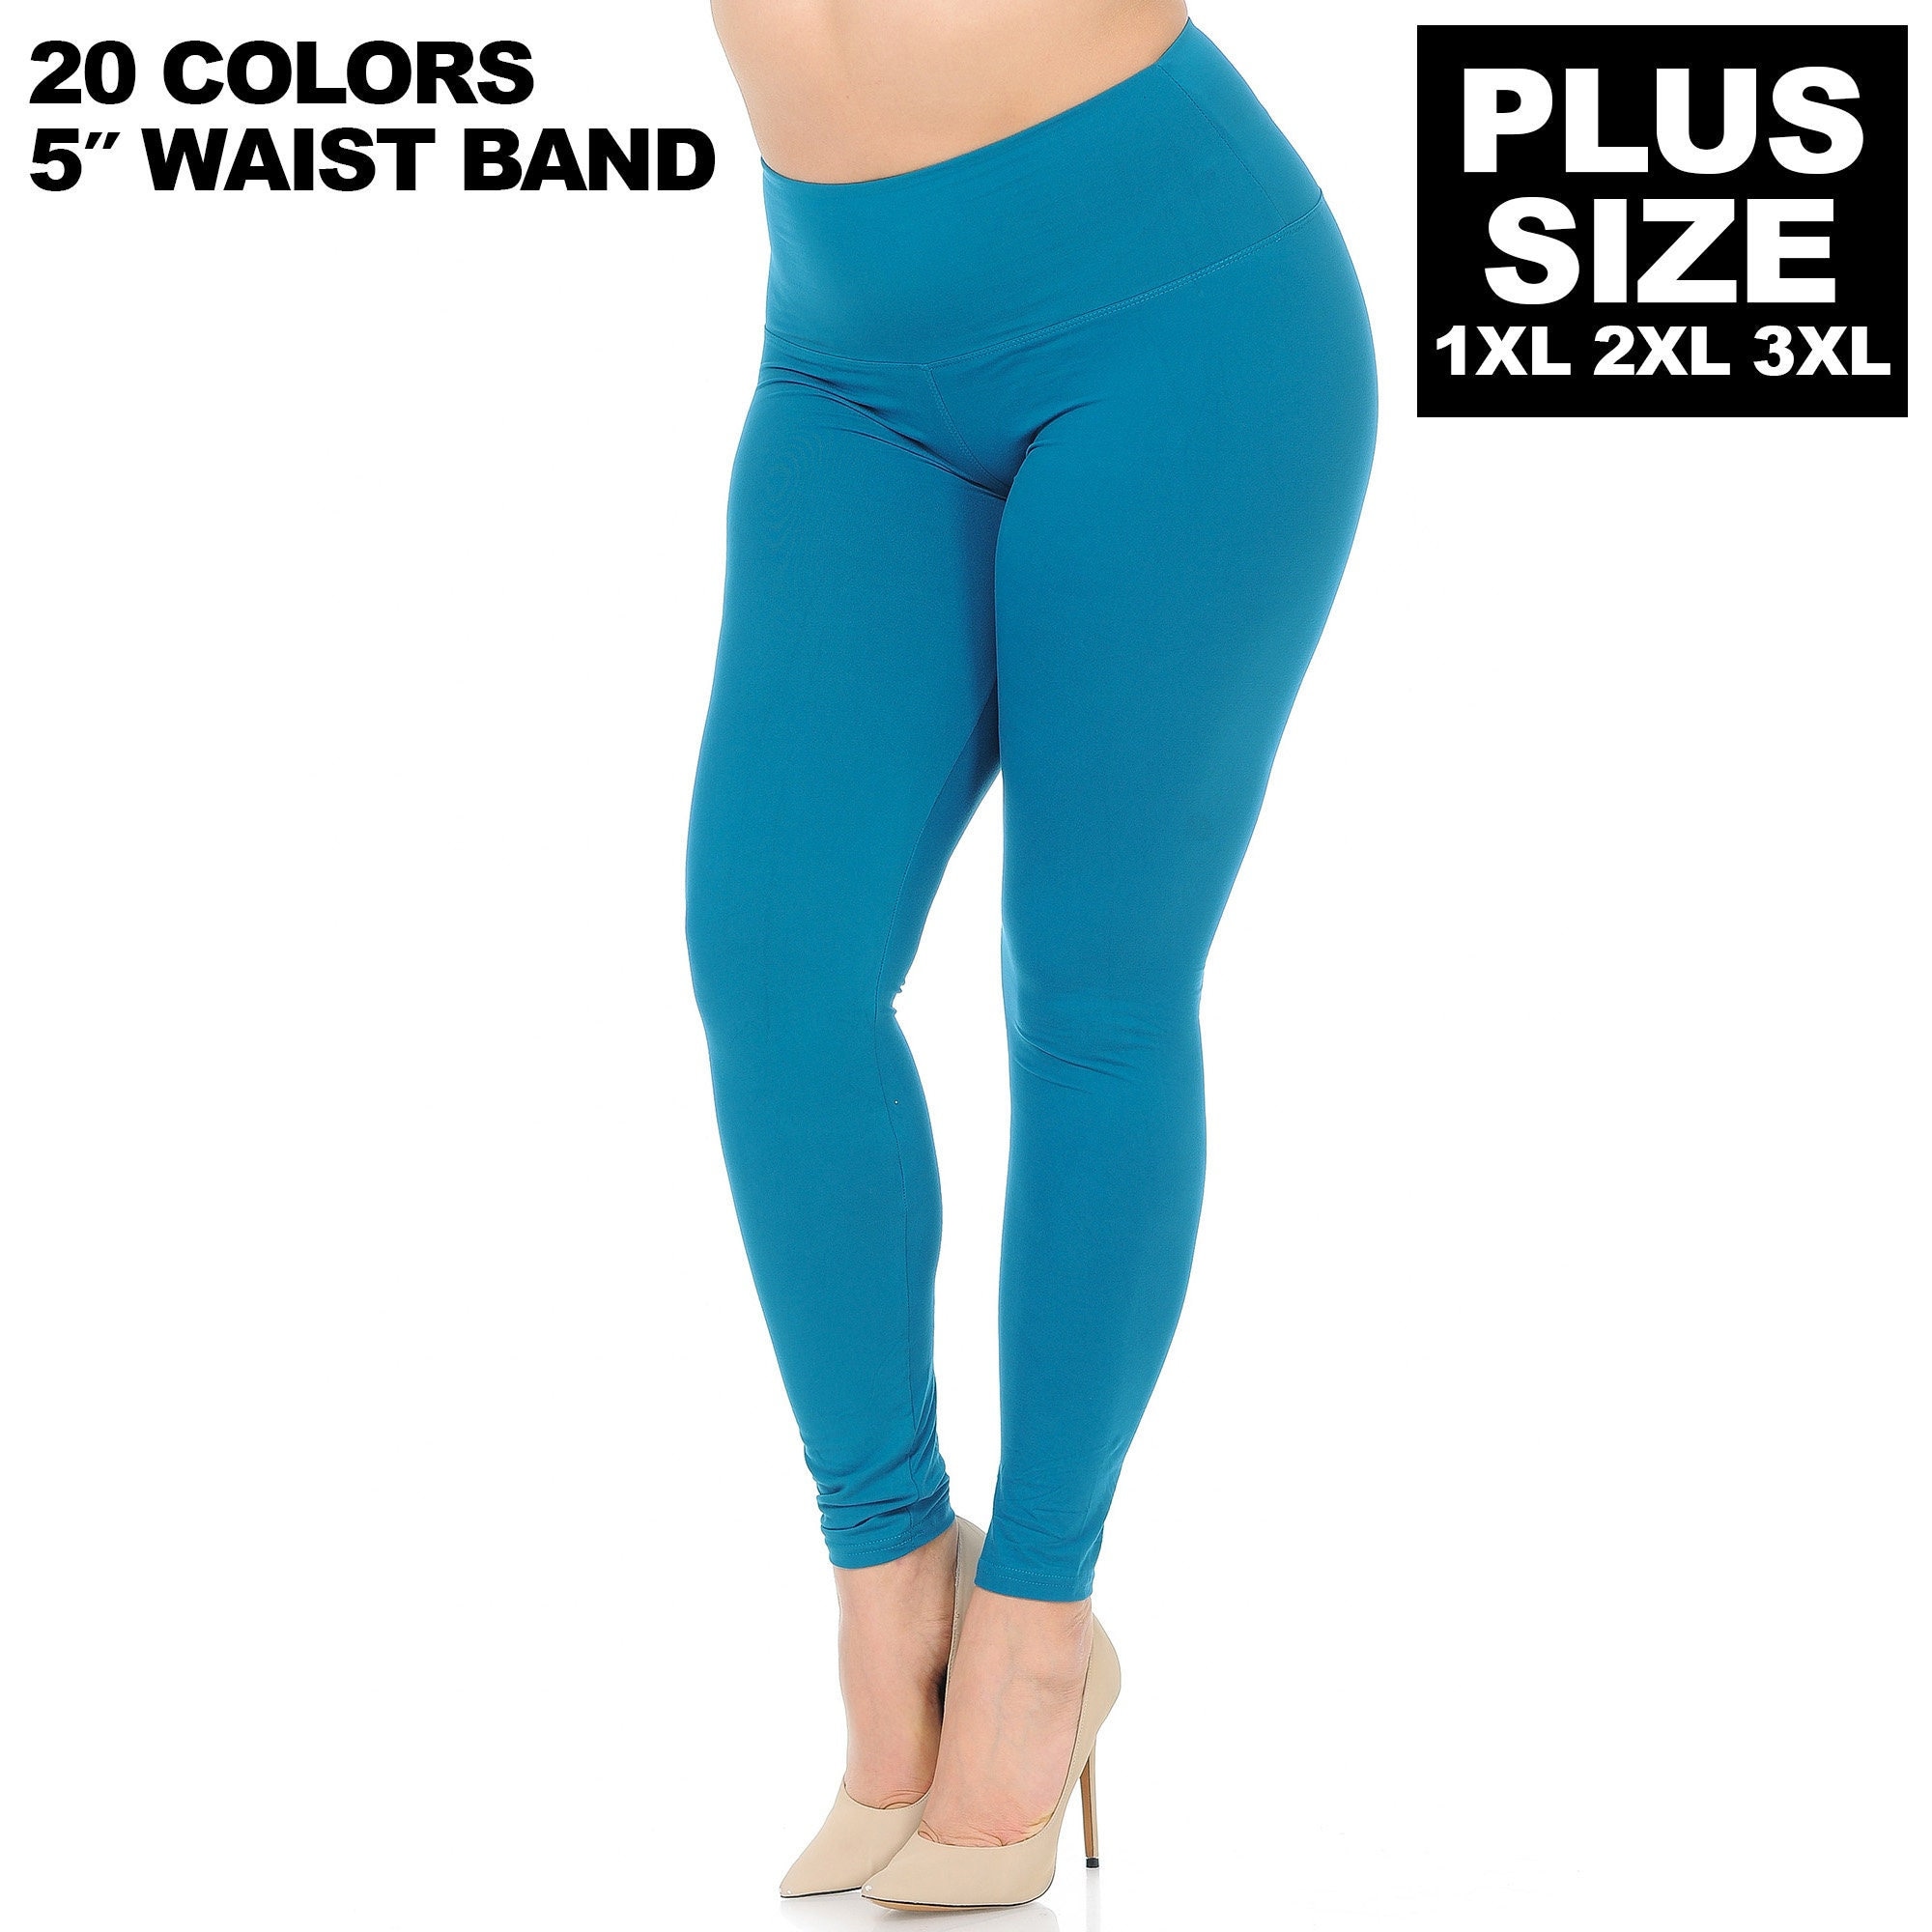 Solid Color 5 Inch Super Waisted Ankle Length Leggings with Gift Box  (Burgundy, Olive, Black) (Plus Size) - Its All Leggings